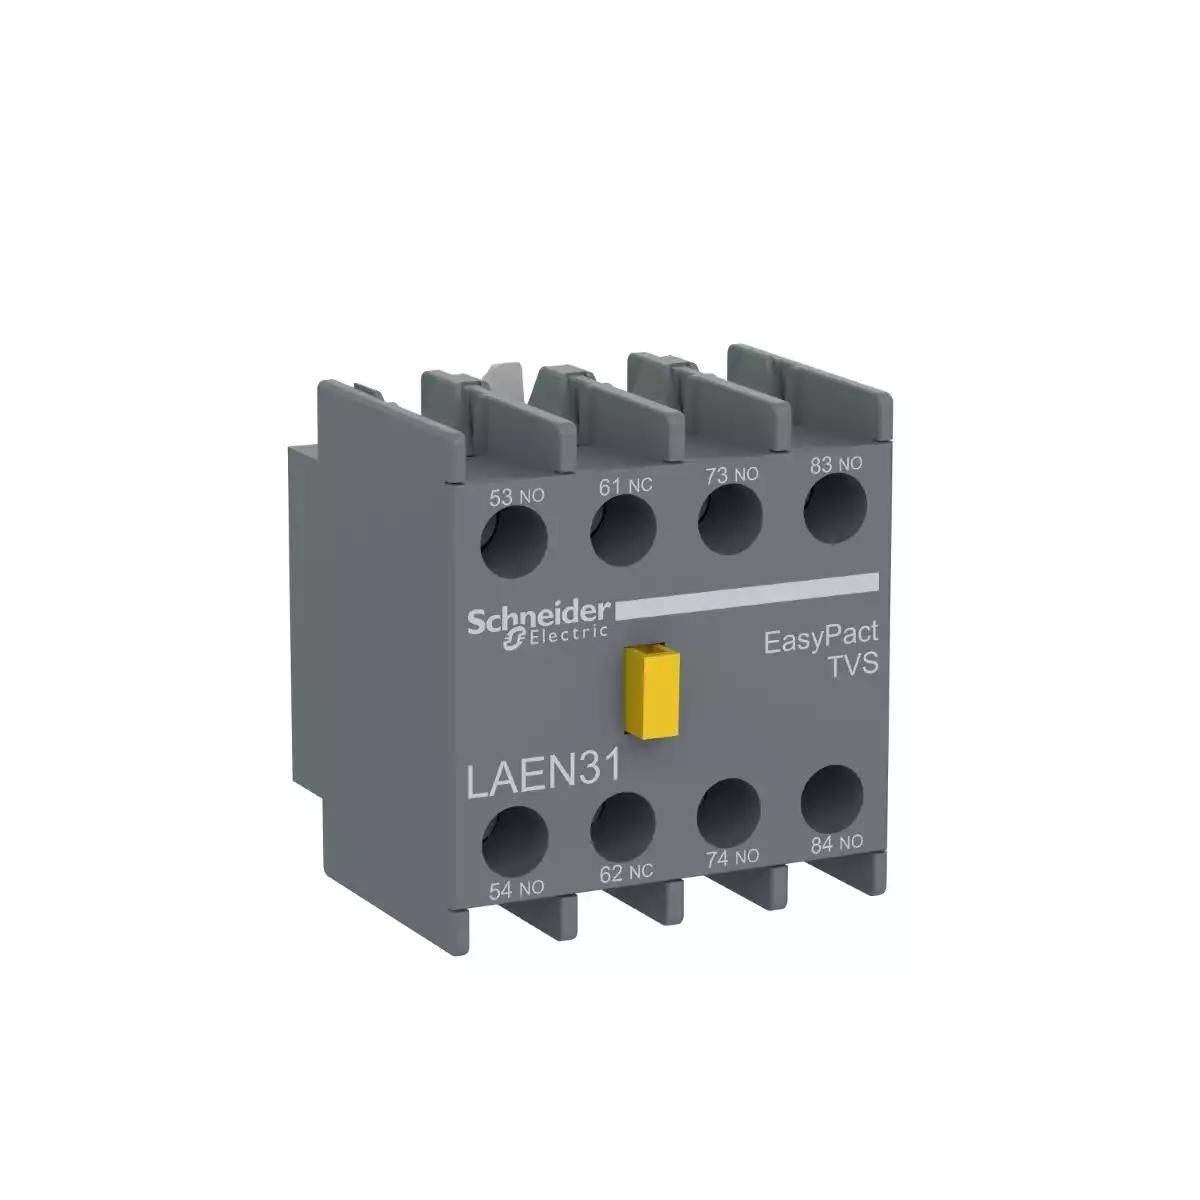 Auxiliary contact block, EasyPact TVS, 4NO